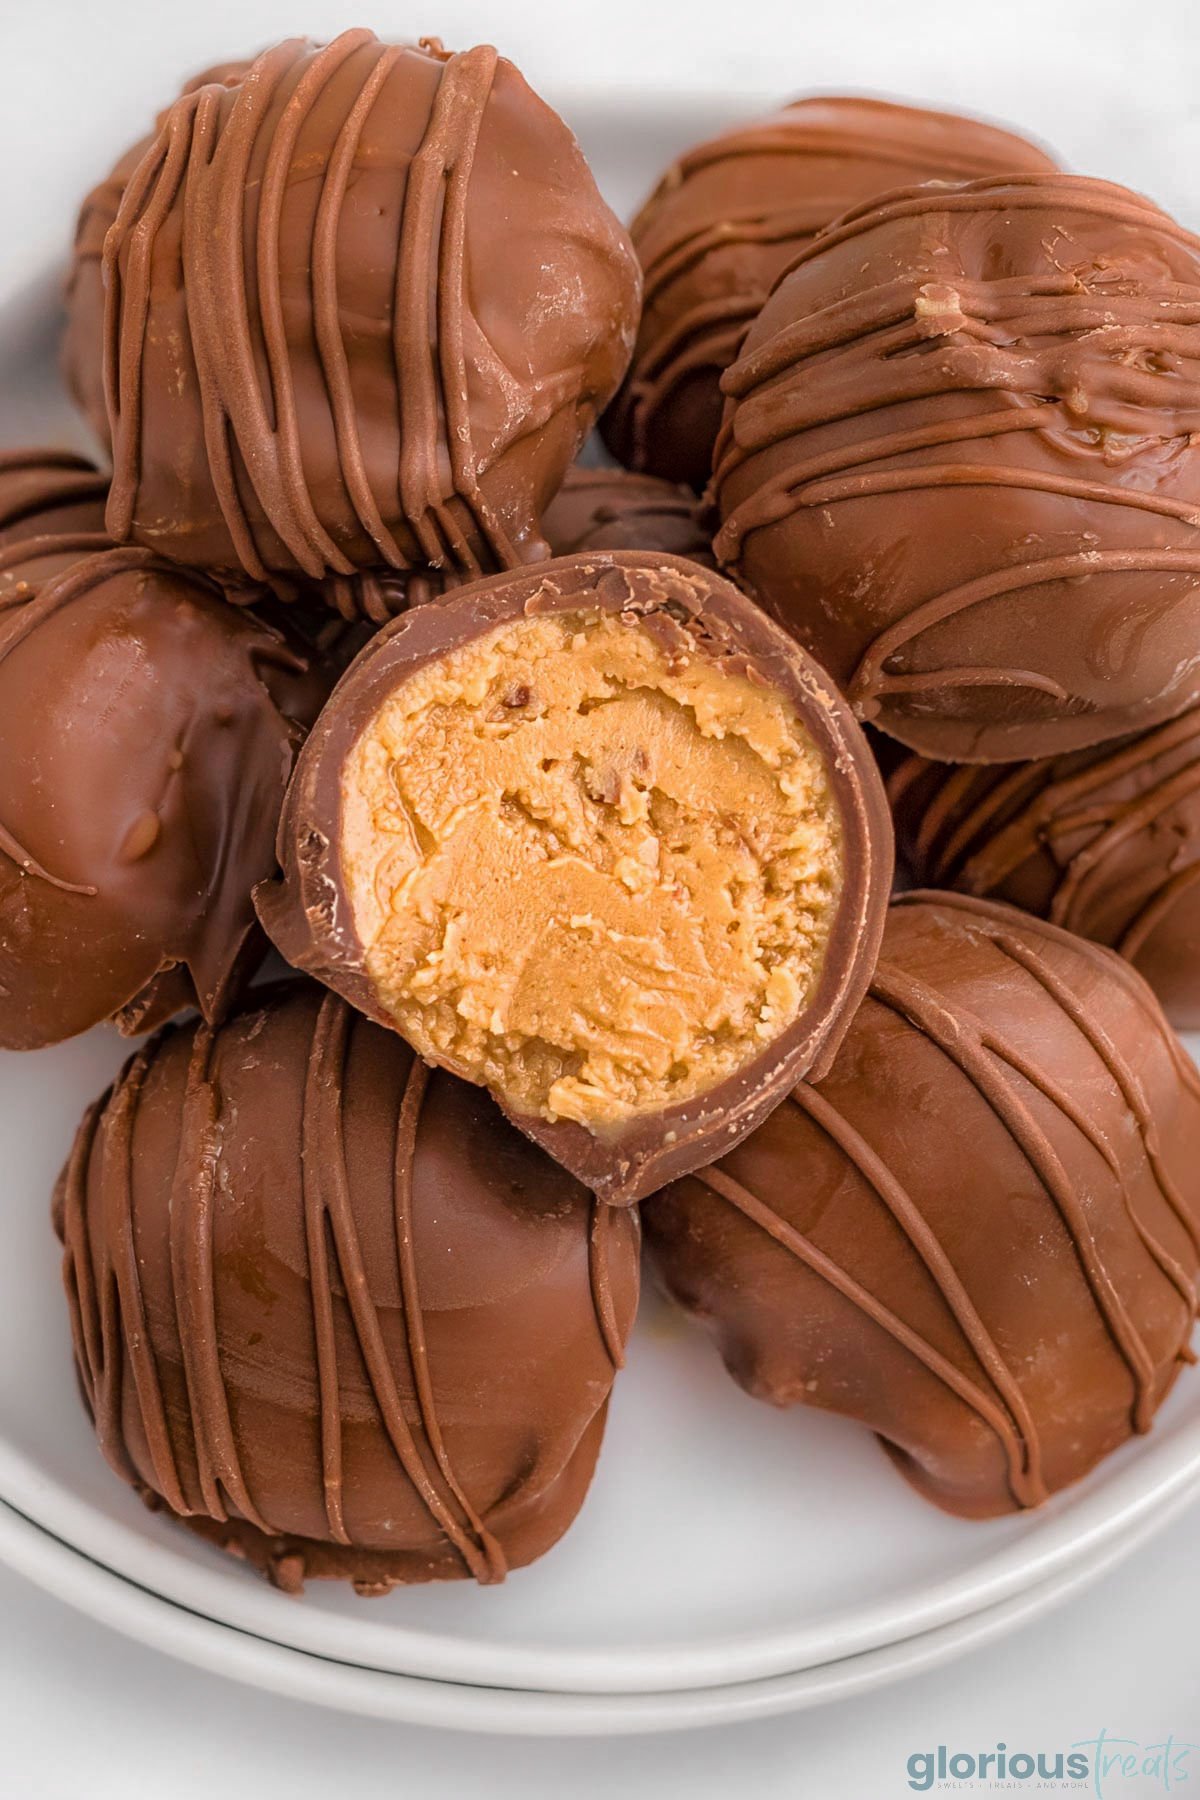 white round plate topped with a dozen or so peanut butter balls covered in chocolate. the top ball is split in half showing the creamy peanut butter filling.